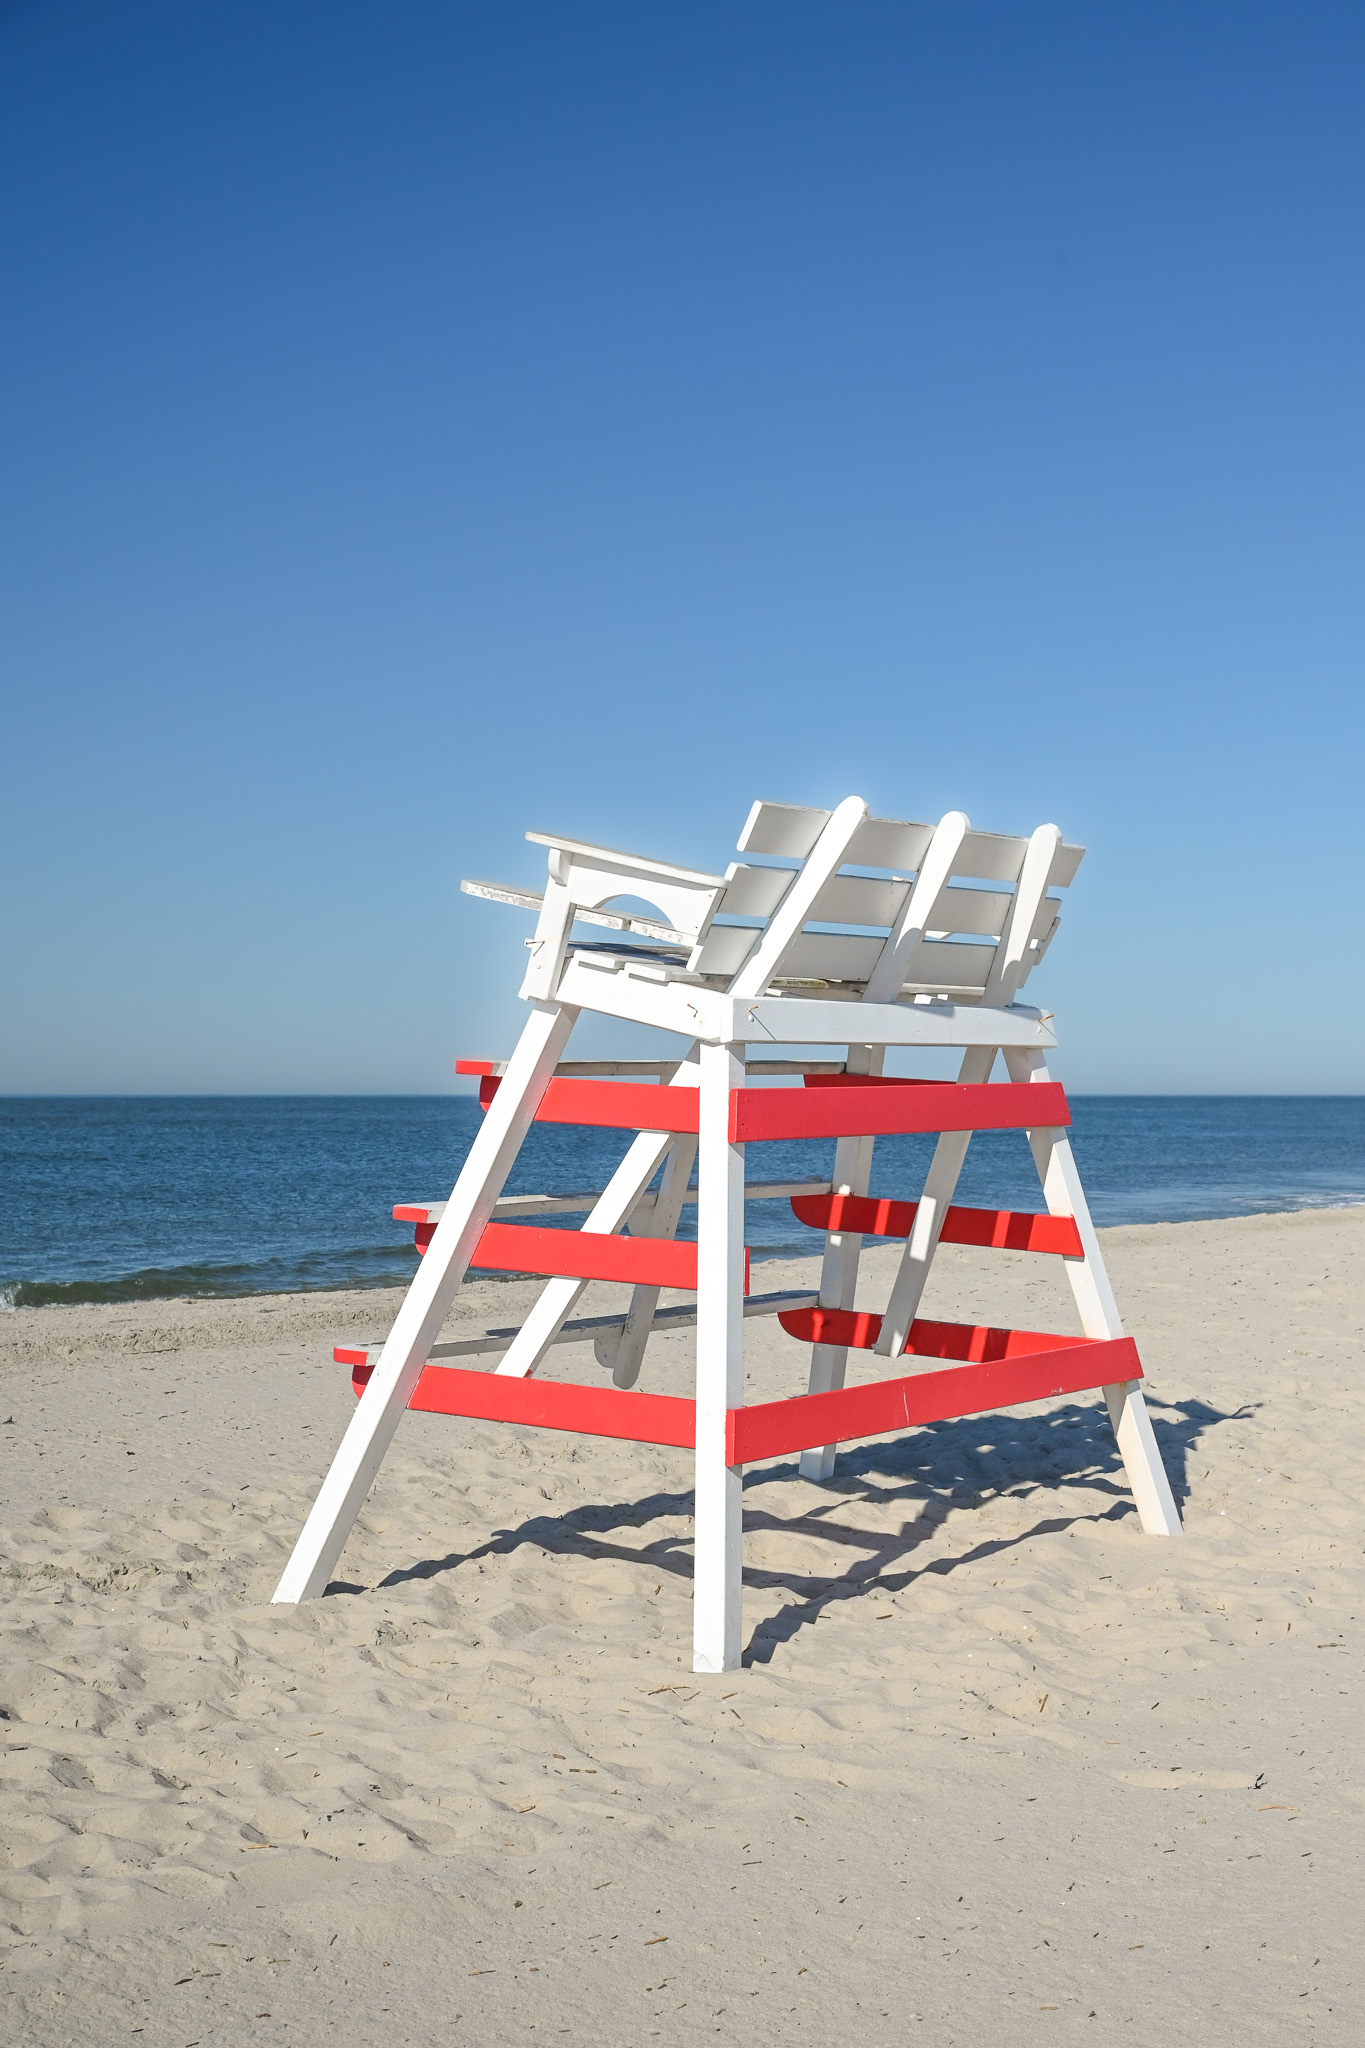 Lifeguard Stand on the beach by Congress Hall.